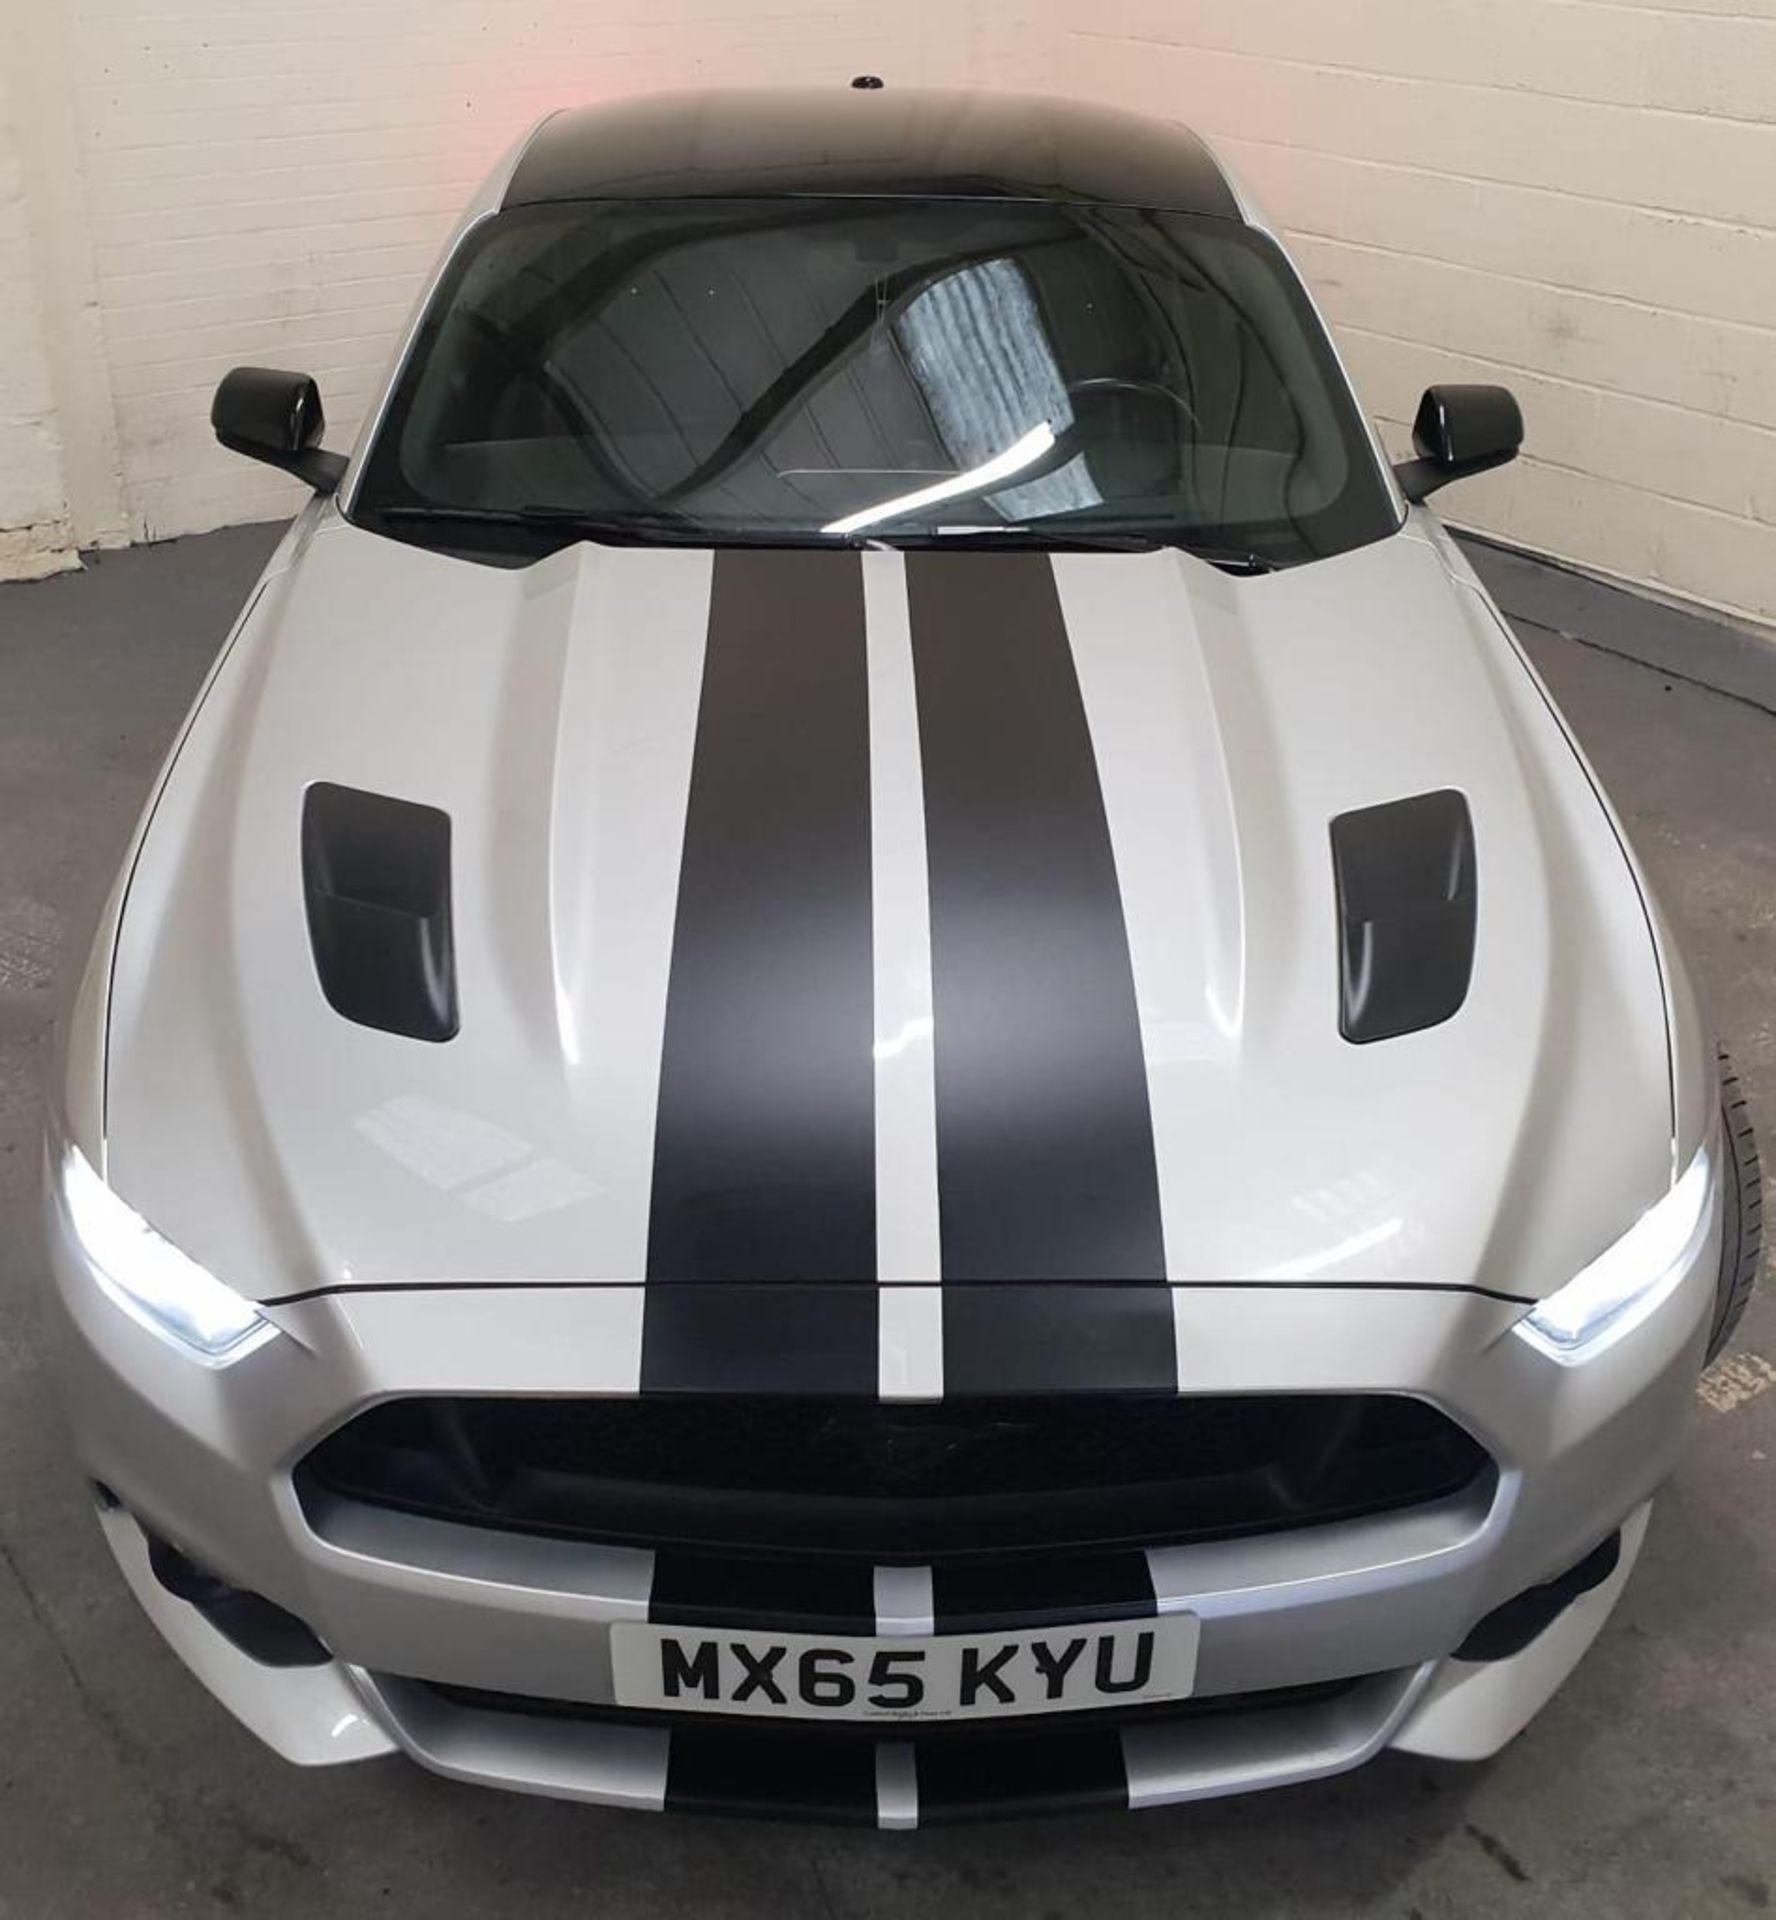 2015/65 REG FORD MUSTANG 5.0 GT LEFT HAND DRIVE, NEW MOT JUST BEEN SERVICED, NEW BRAKES ETC *NO VAT* - Image 3 of 18